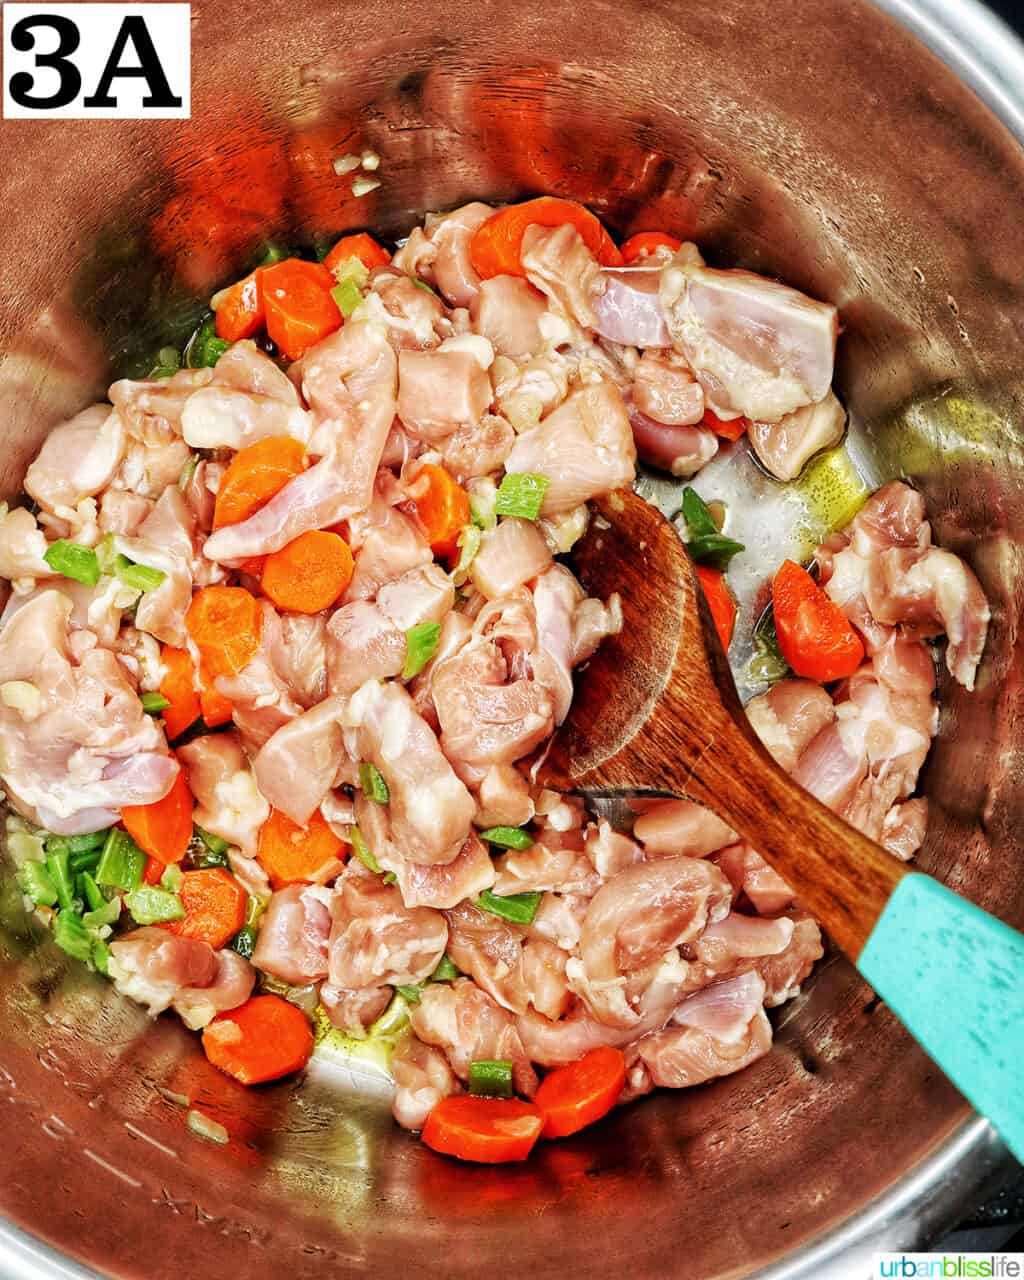 wooden spoon mixing raw chicken thigh meat with vegetables in an instant pot.